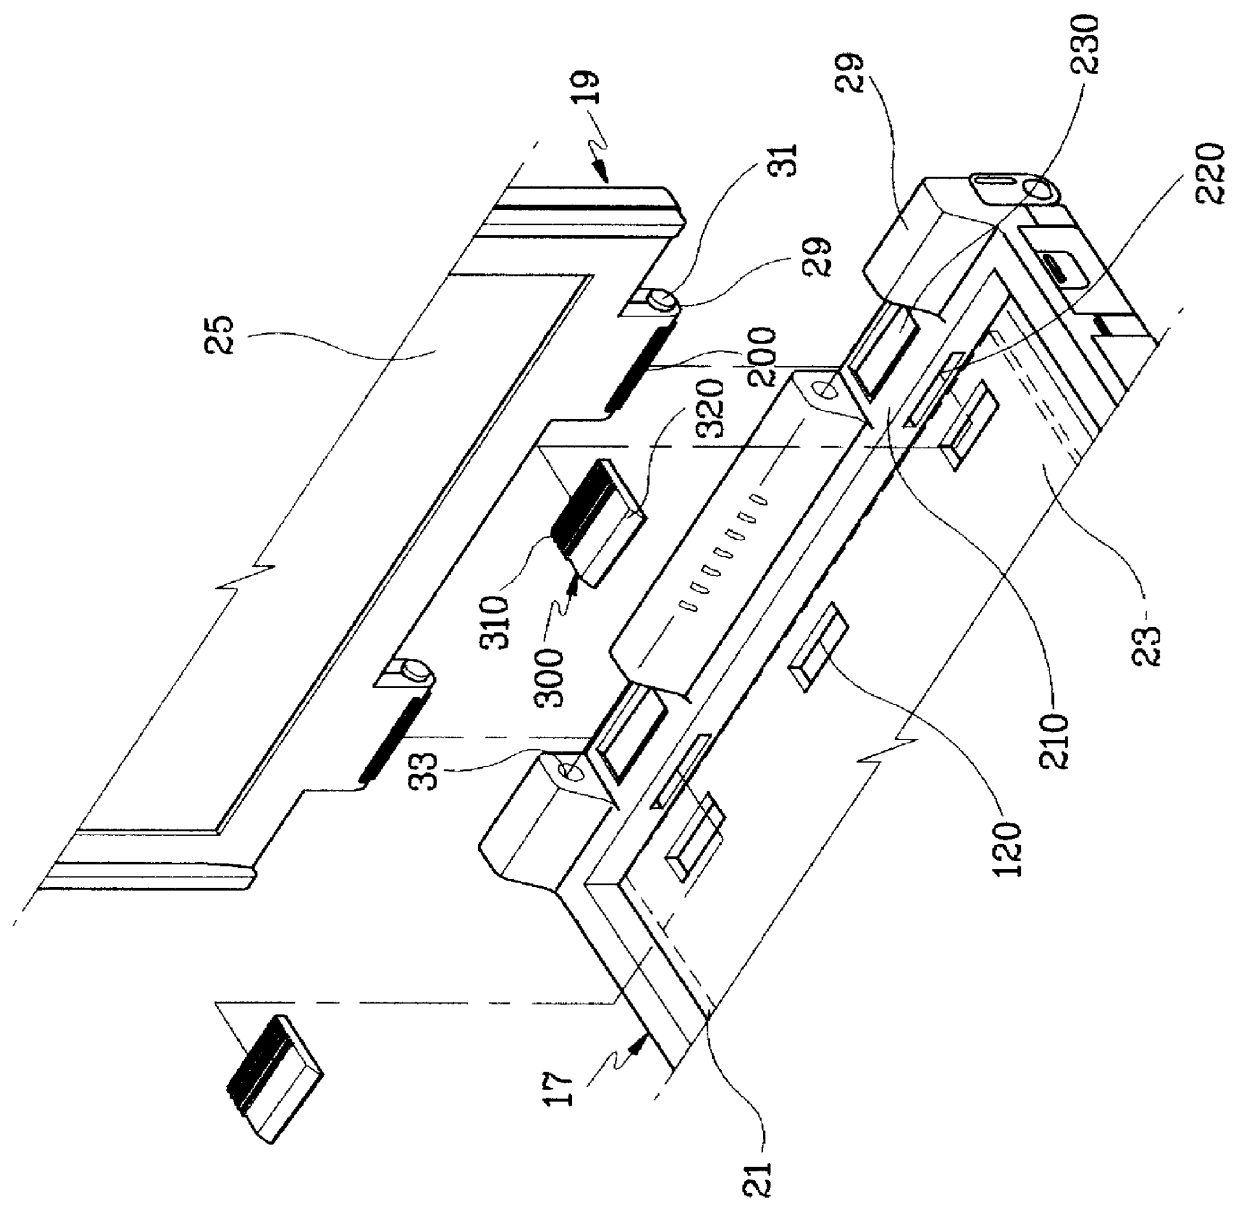 Apparatus for tilting keyboard of portable computer